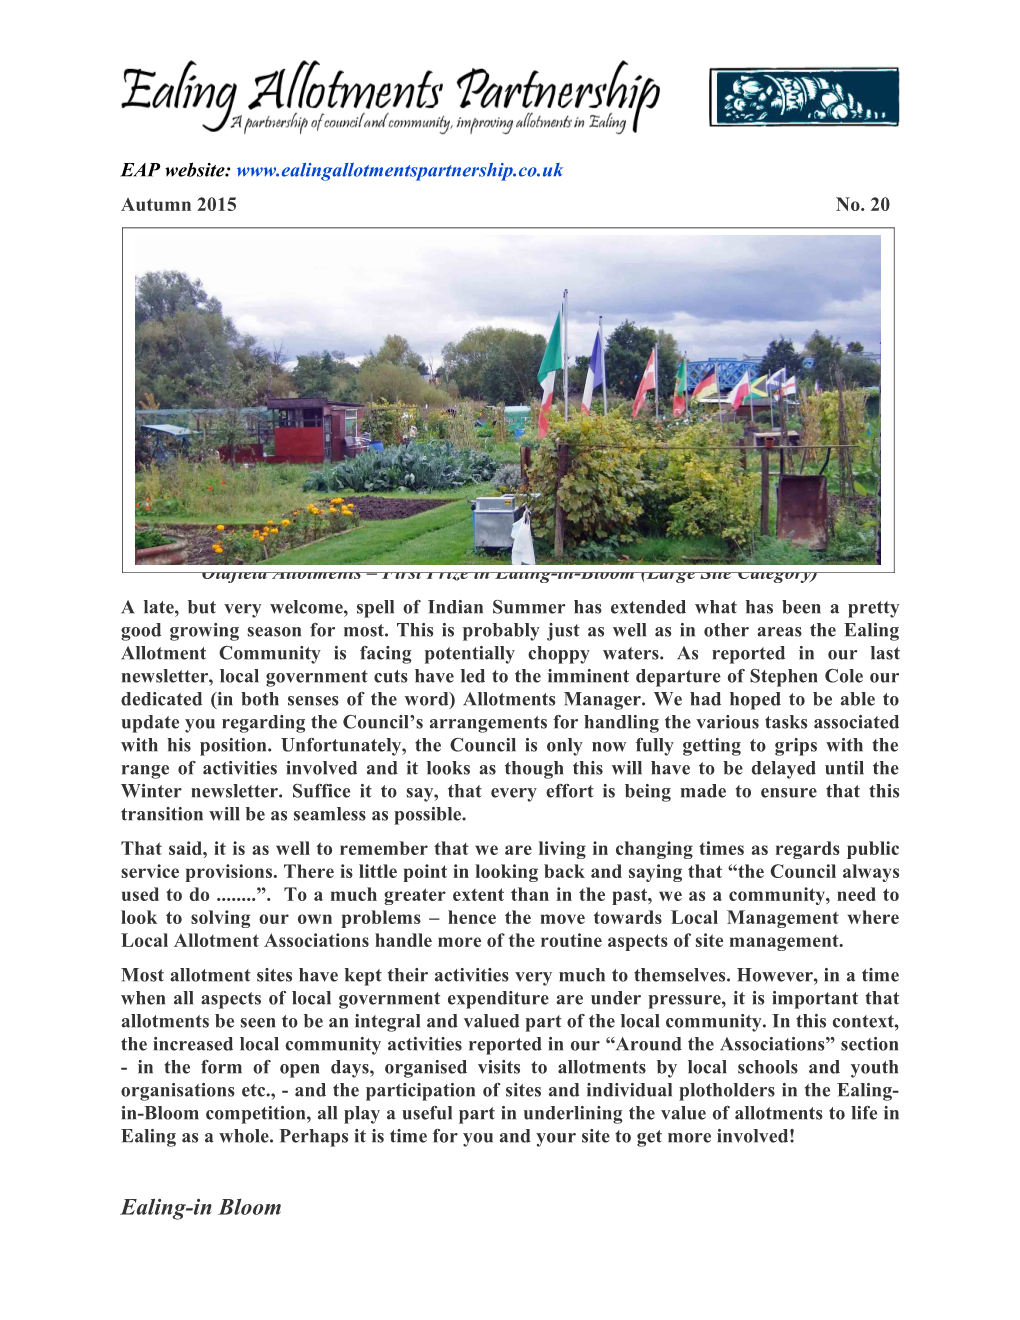 Oldfield Allotments First Prize in Ealing-In-Bloom (Large Site Category)